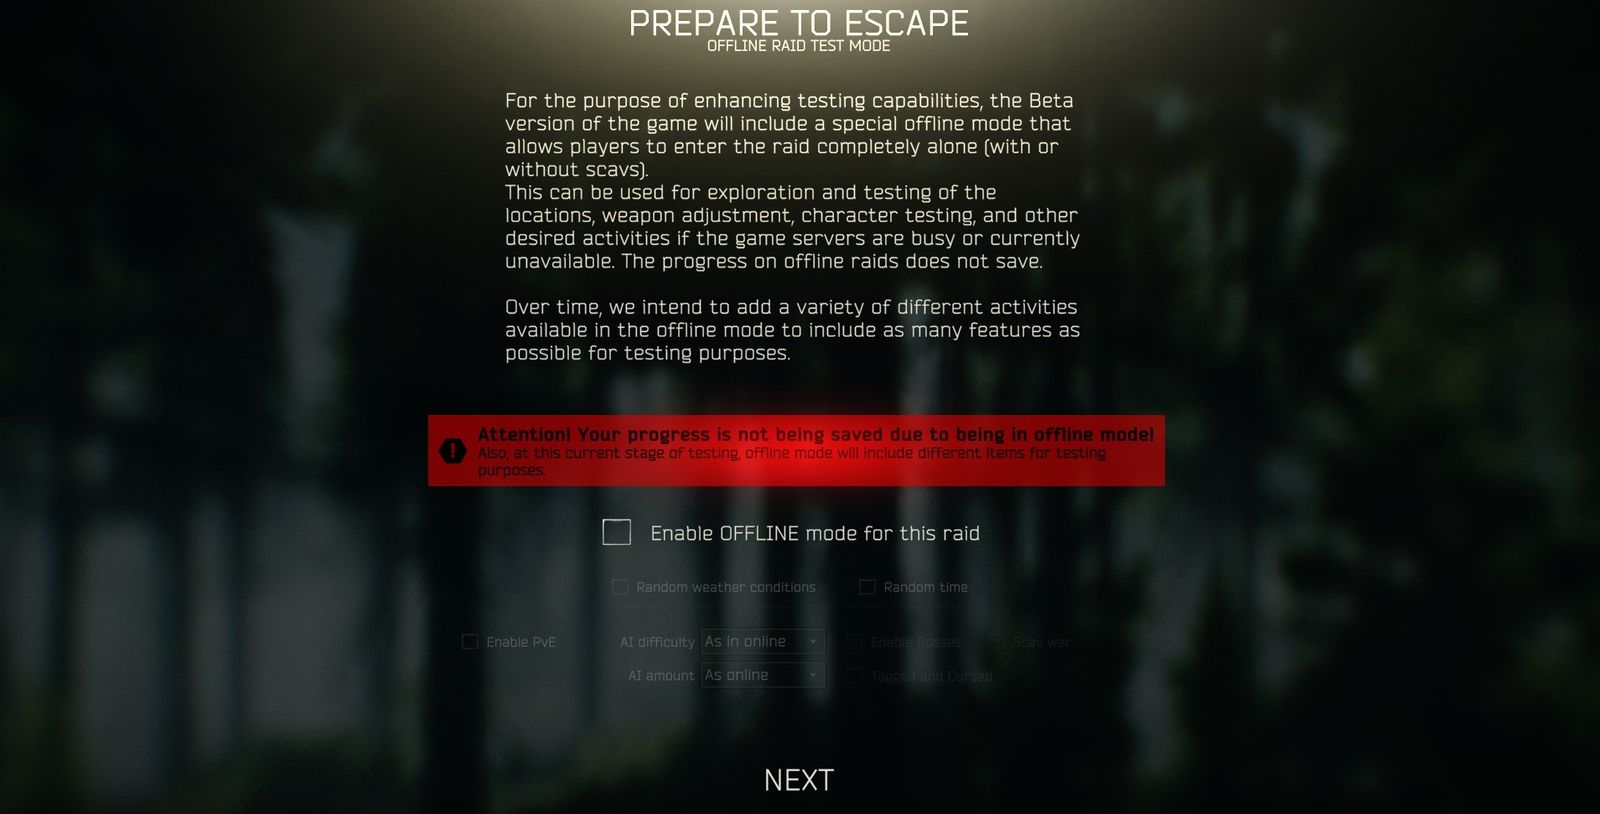 When starting a raid, offline mode can be selected in Escape From Tarkov.